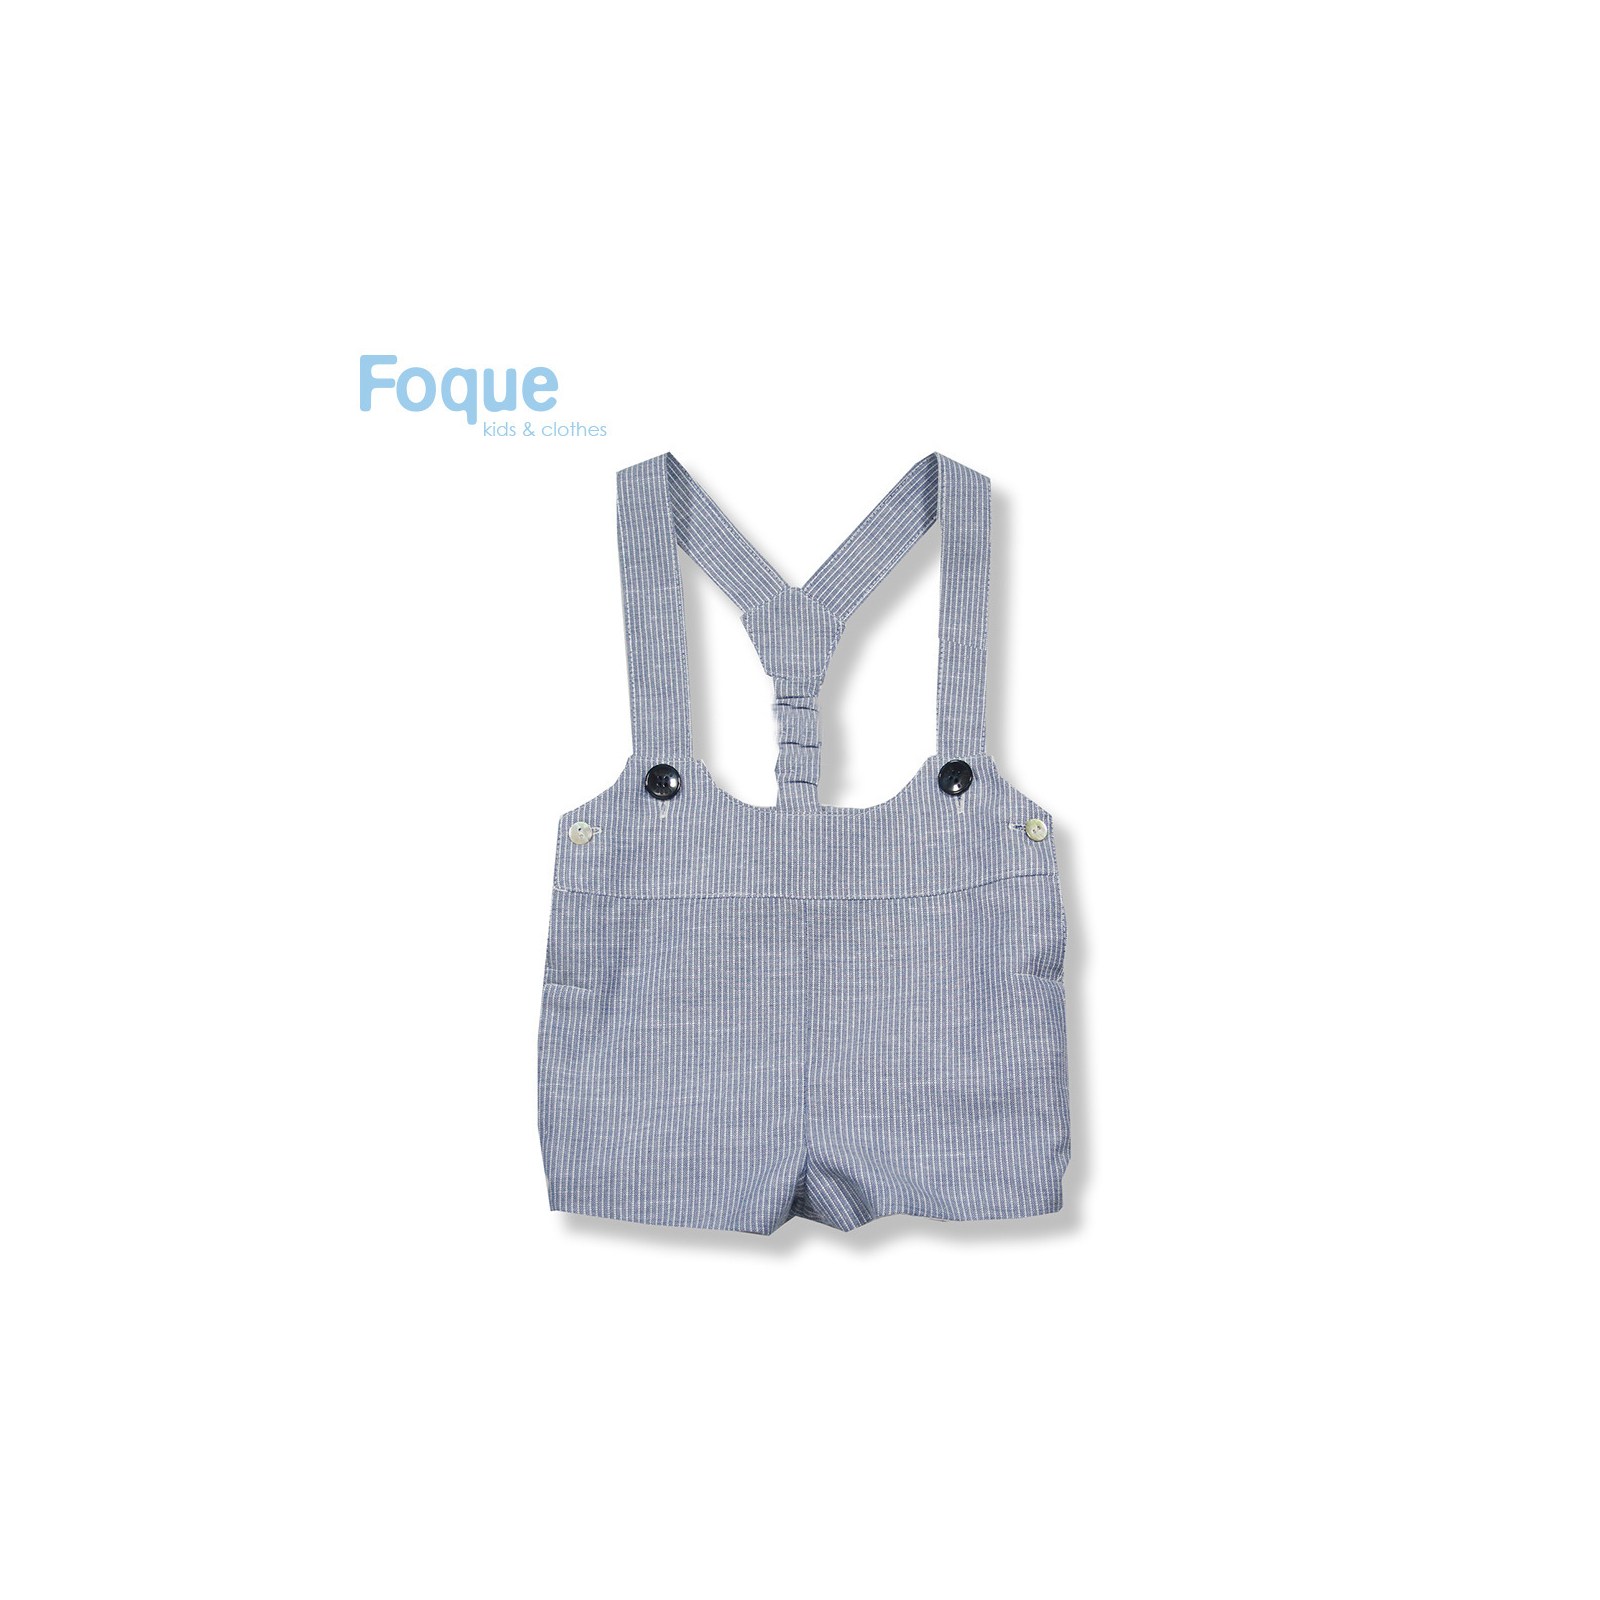 Komplet Foque by Fiocco Kids